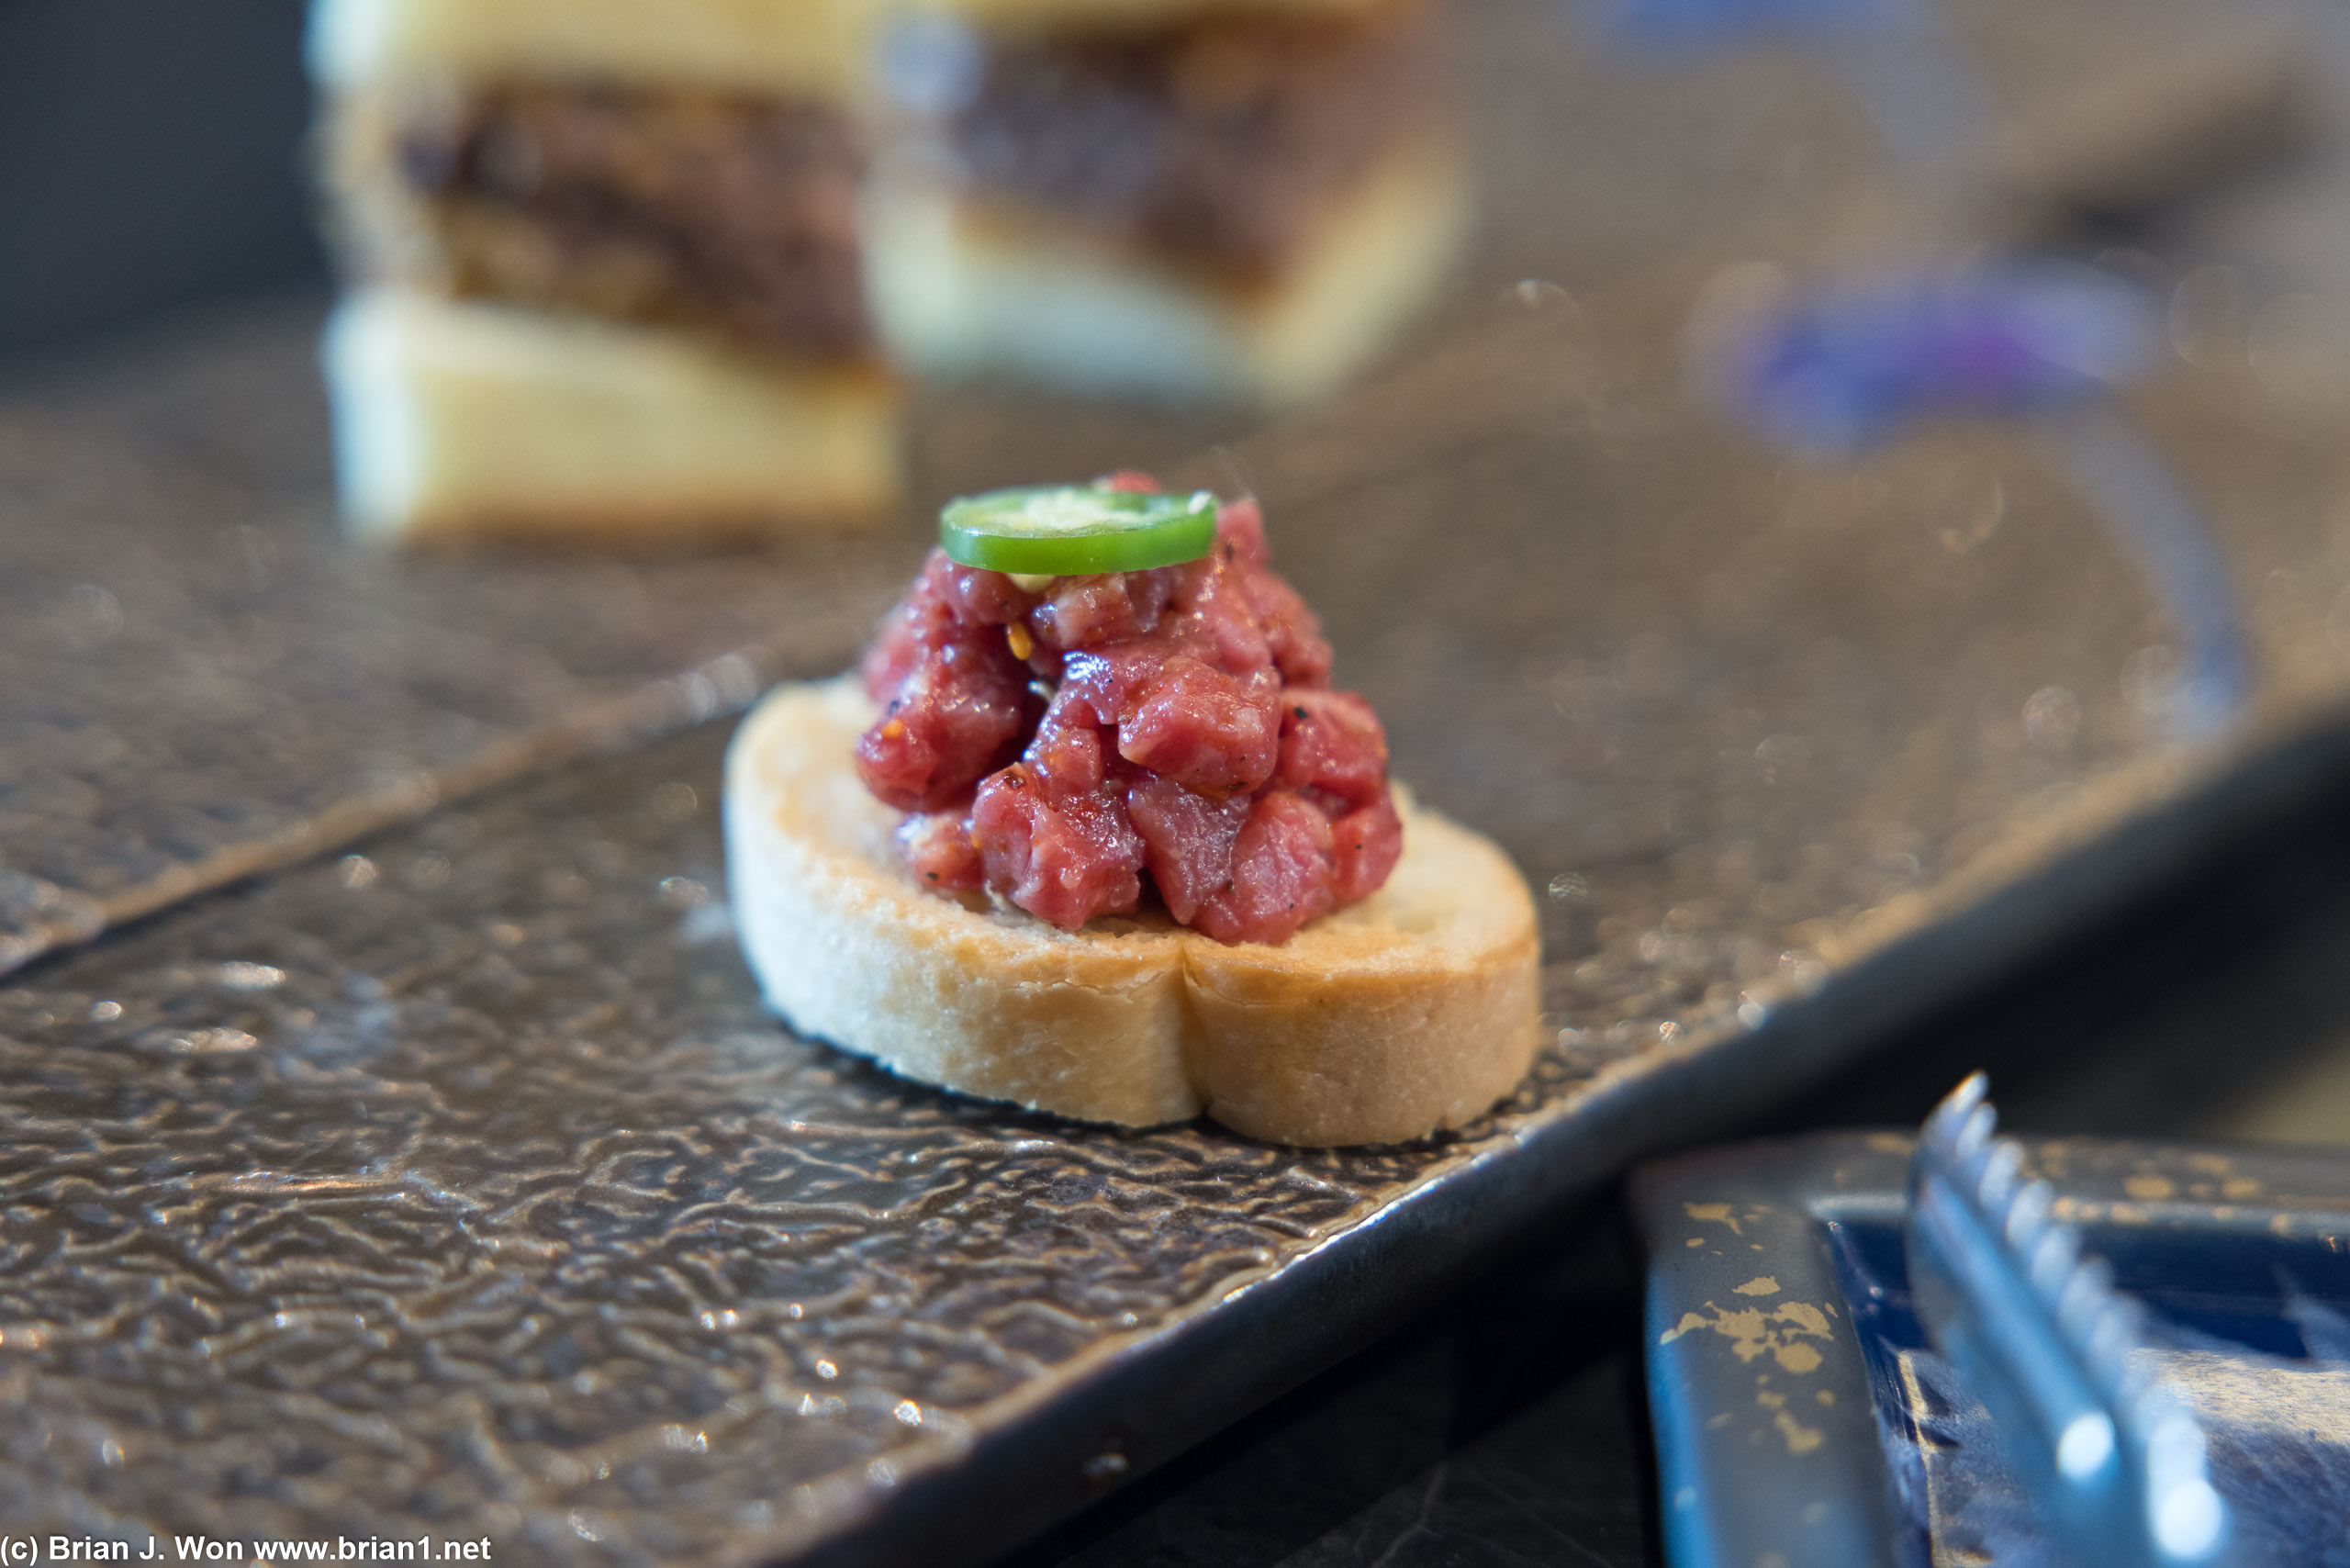 Beef tartare was good if you don't mind bread.